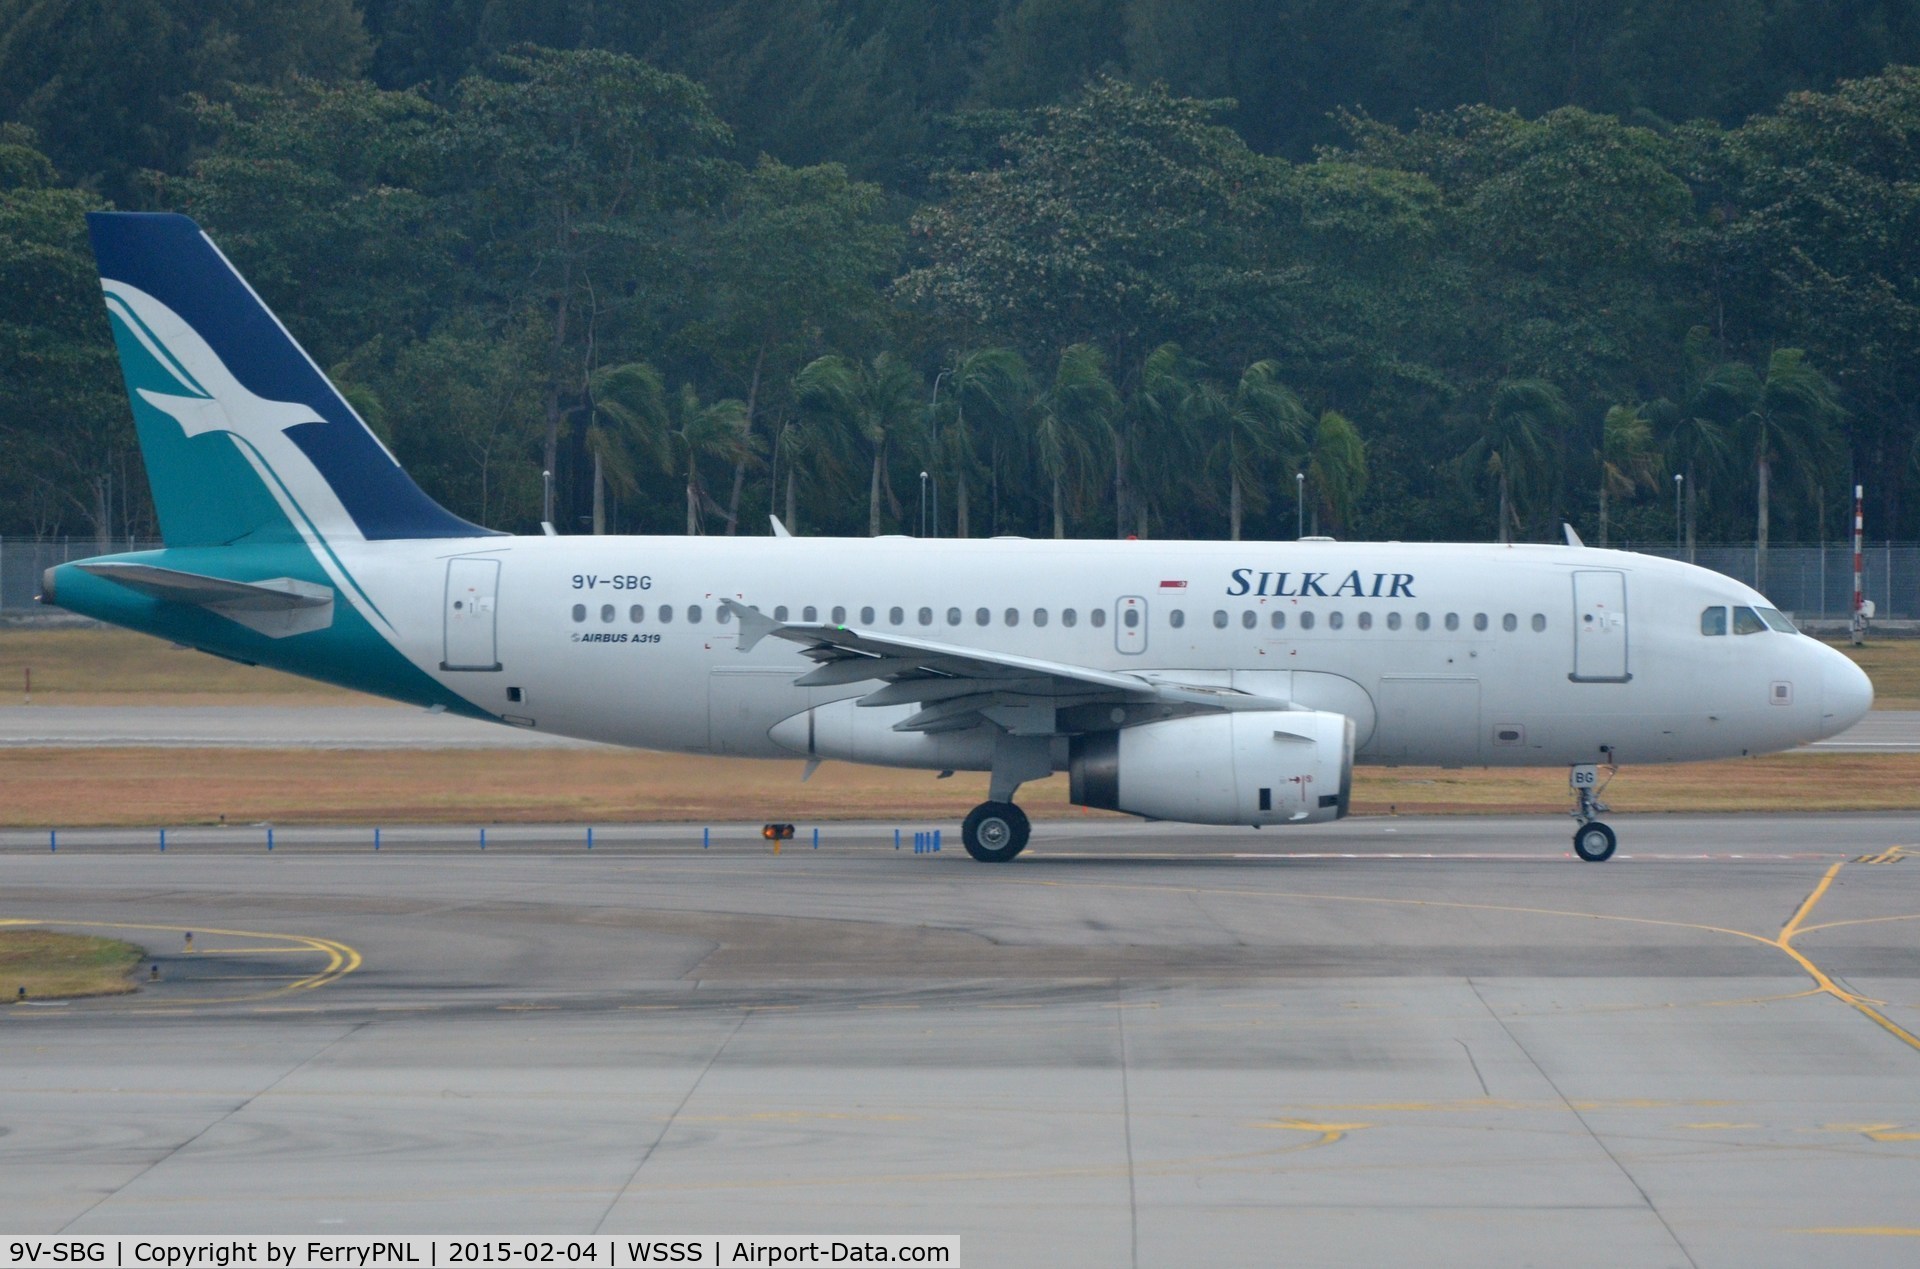 9V-SBG, 2010 Airbus A319-133 C/N 4215, Silk Air taxies out for departure